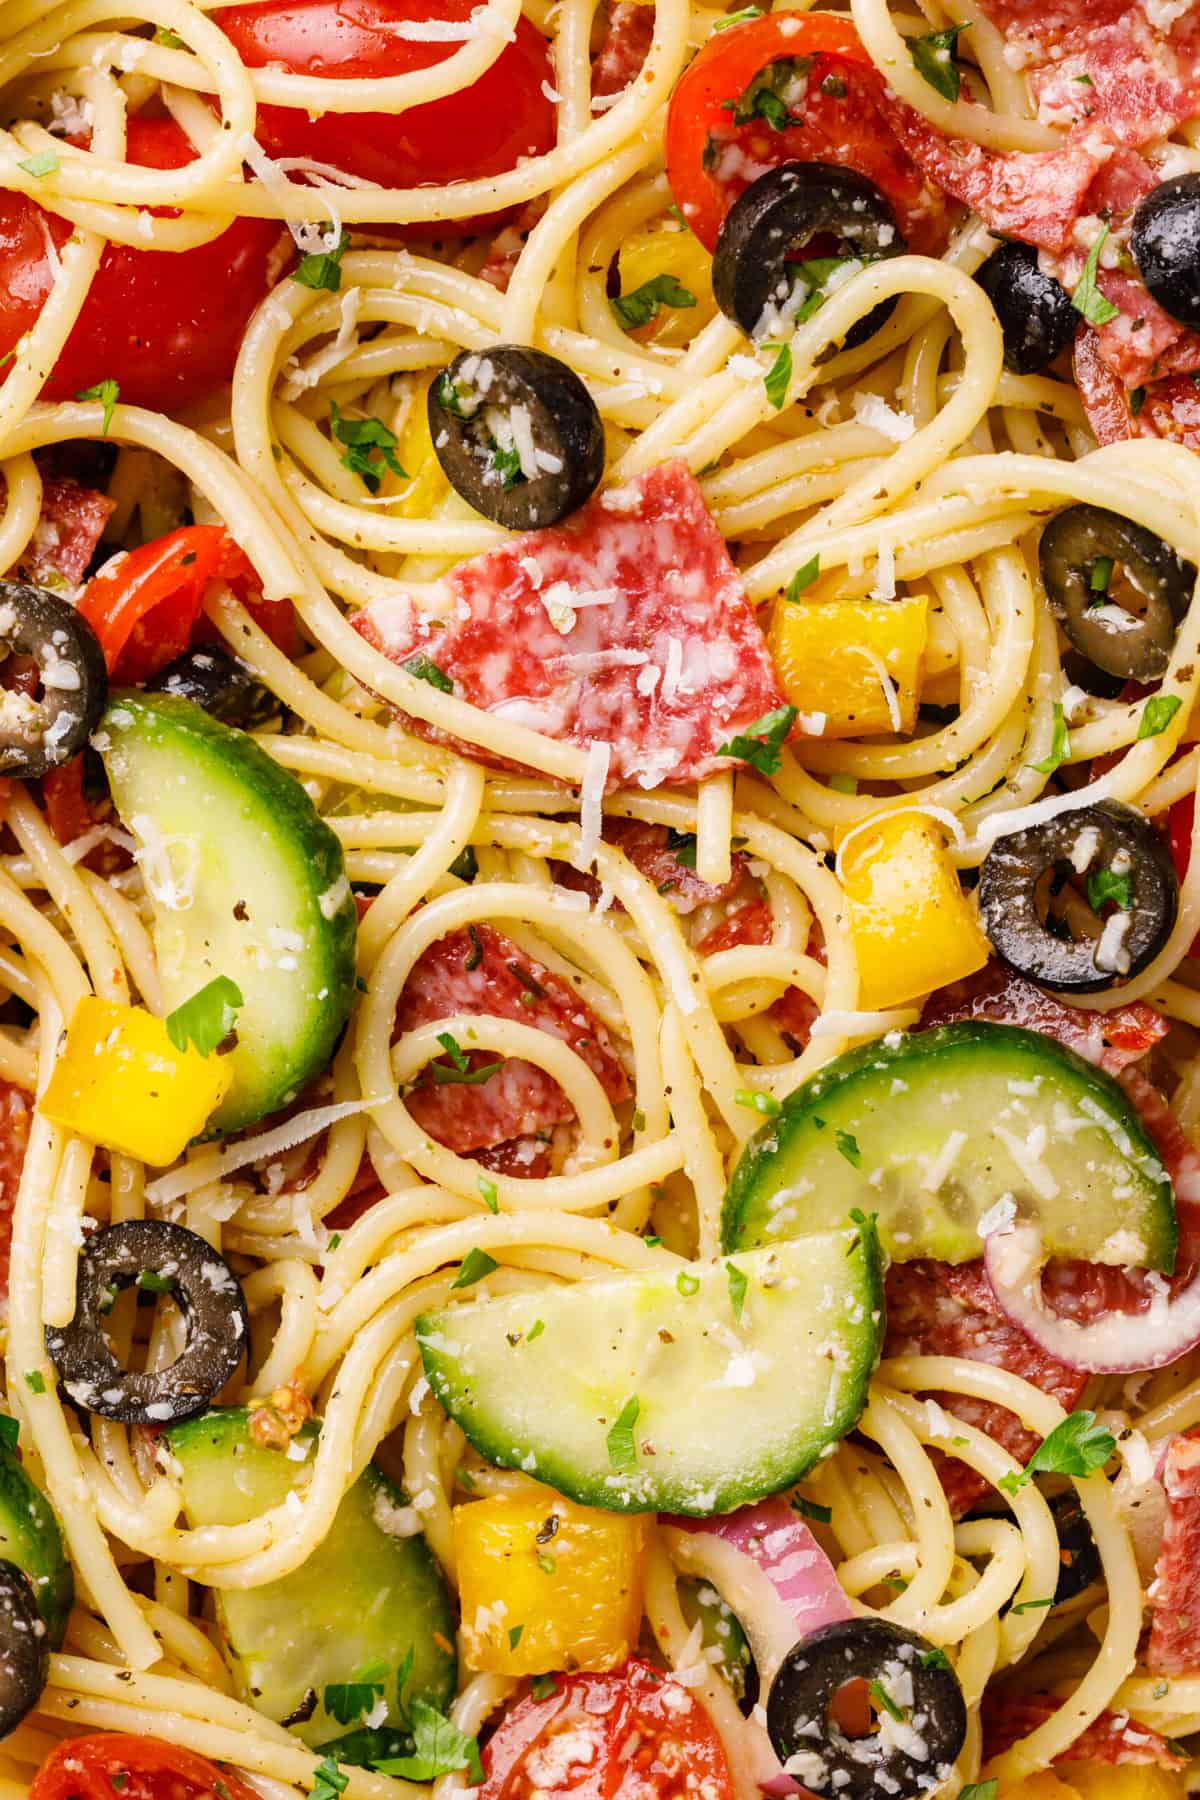 spaghetti salad with peppers, cucumbers, salami, onion, olives, cheese